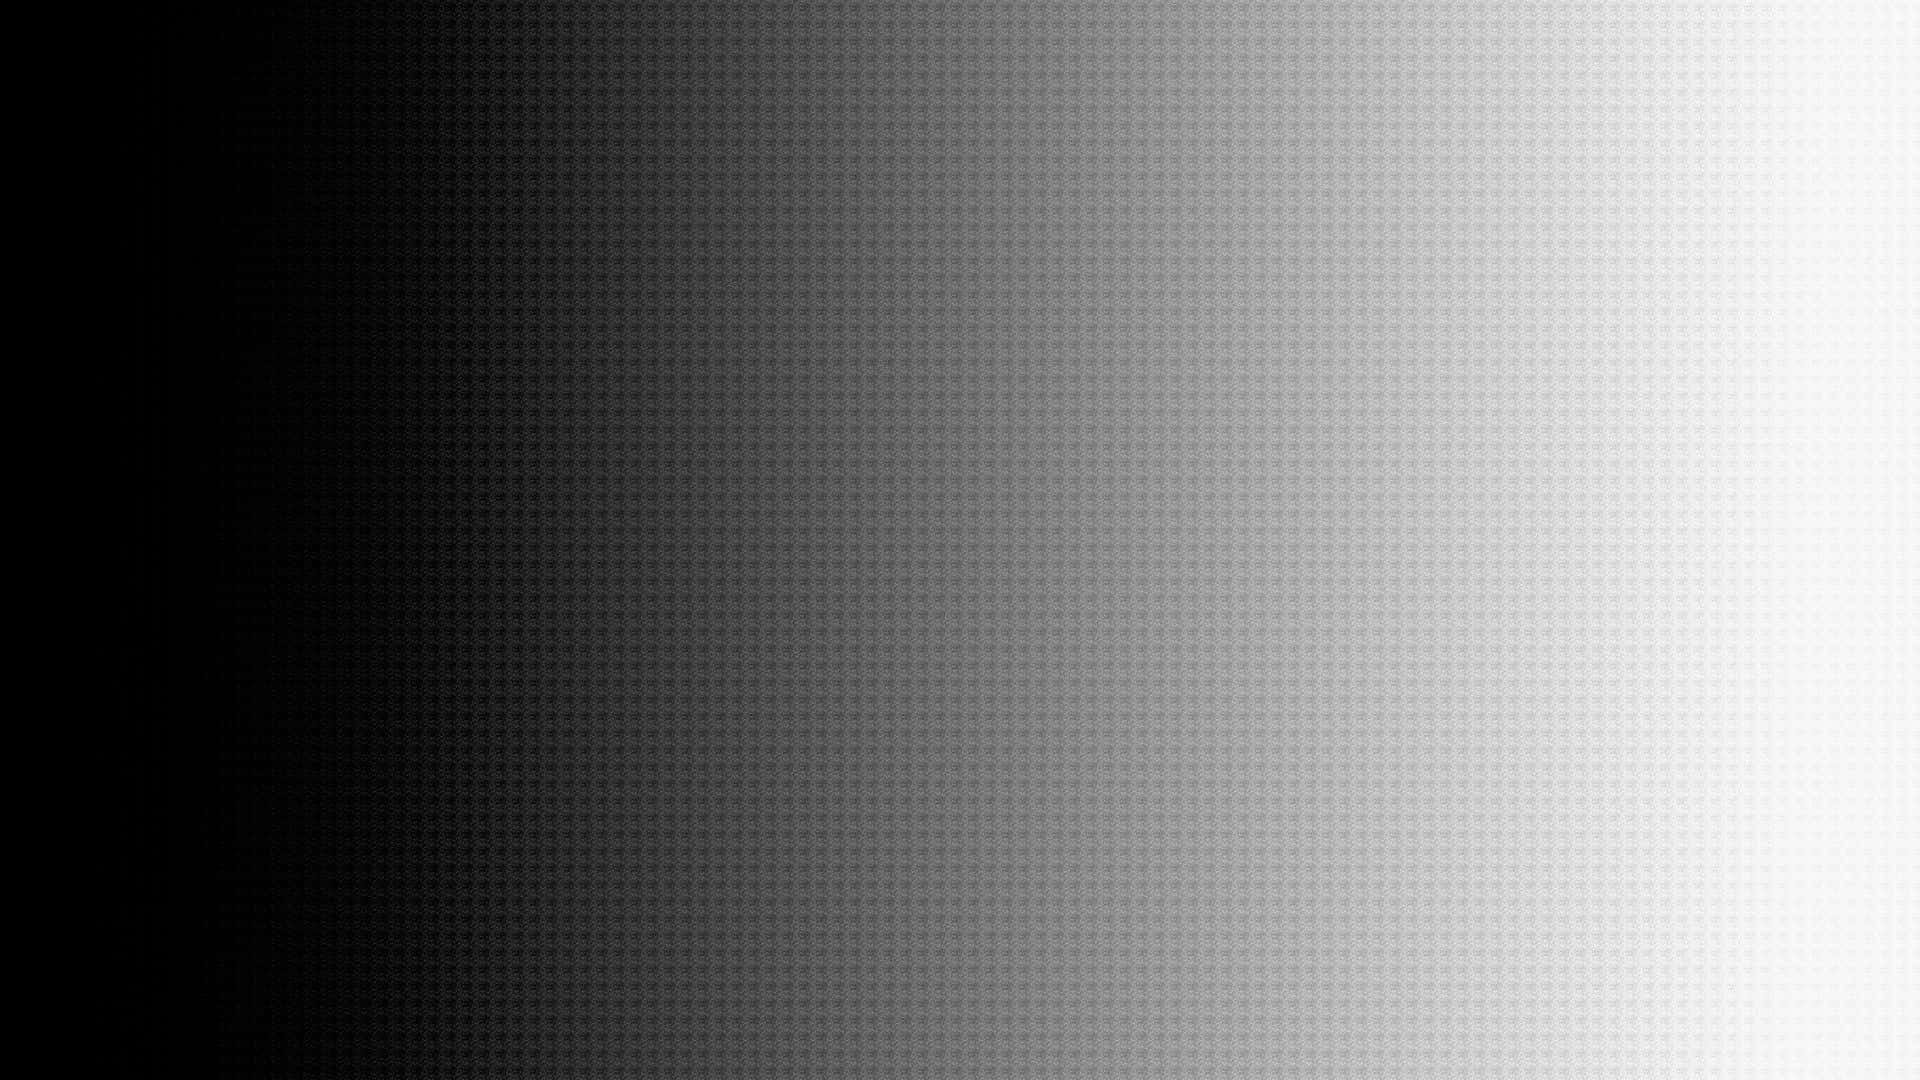 A Black And White Background With A White Dotted Line